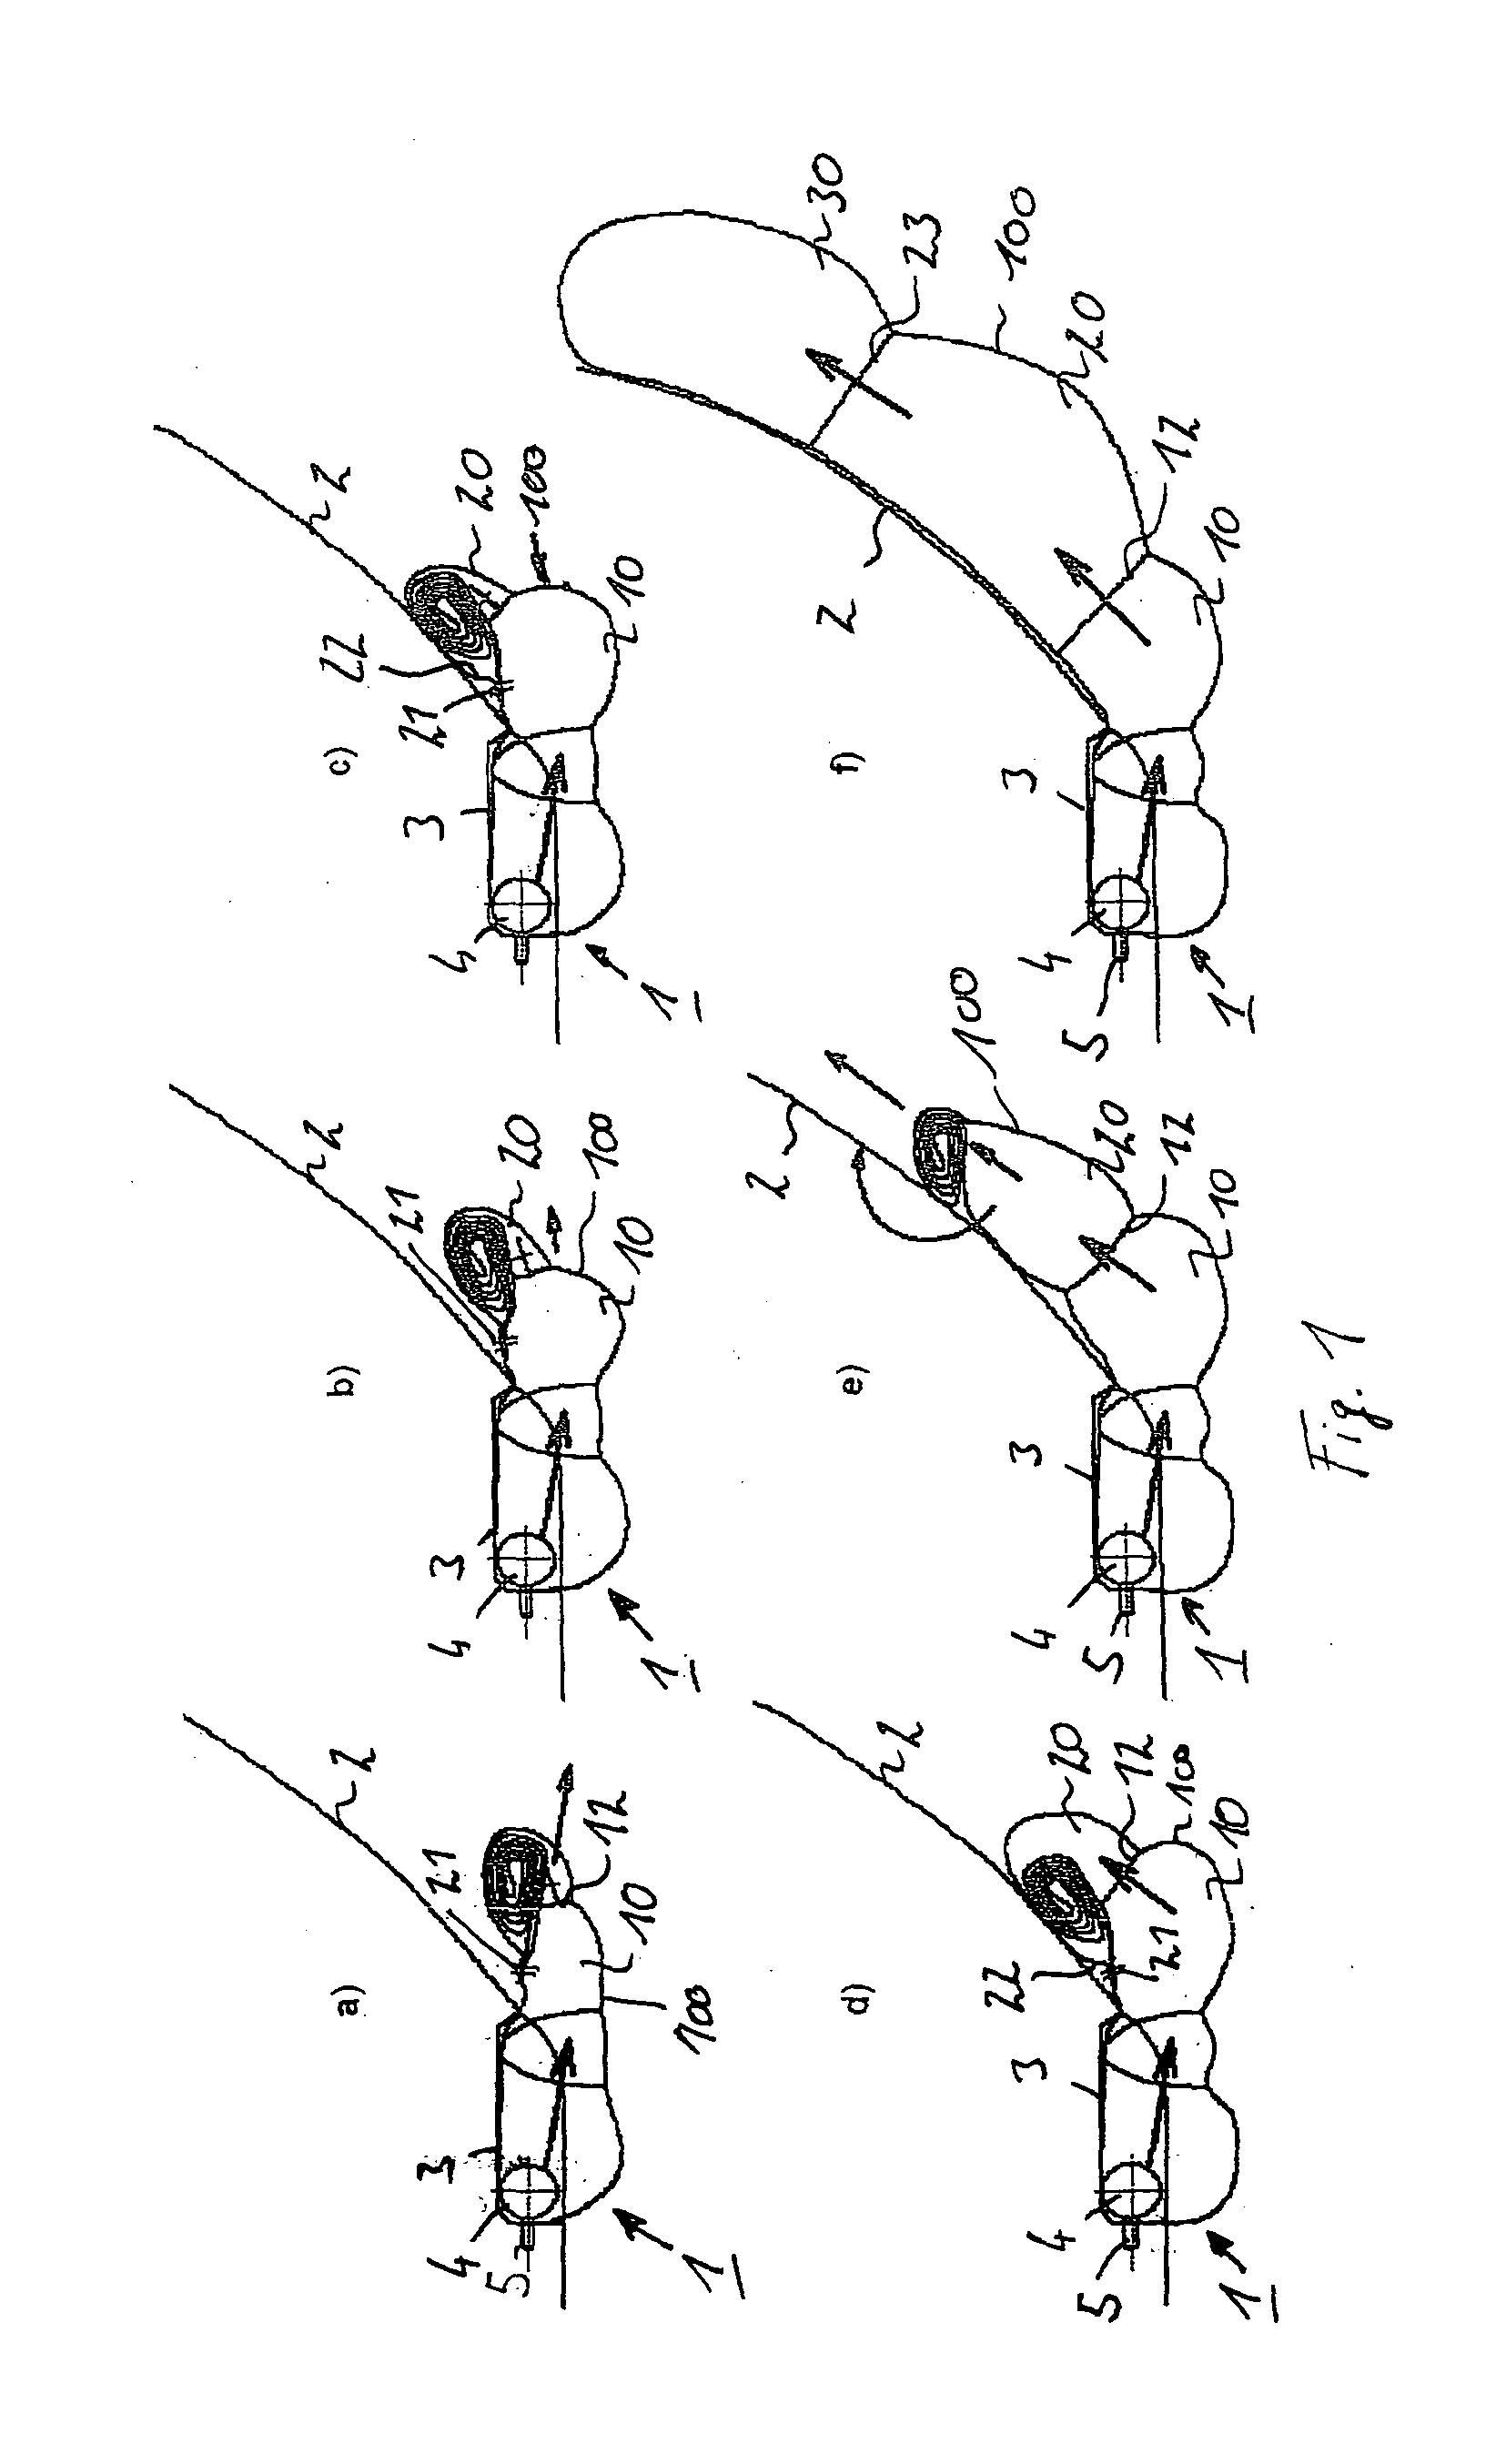 Apparatus for Protecting the Knee Region of a Vehicle Occupant